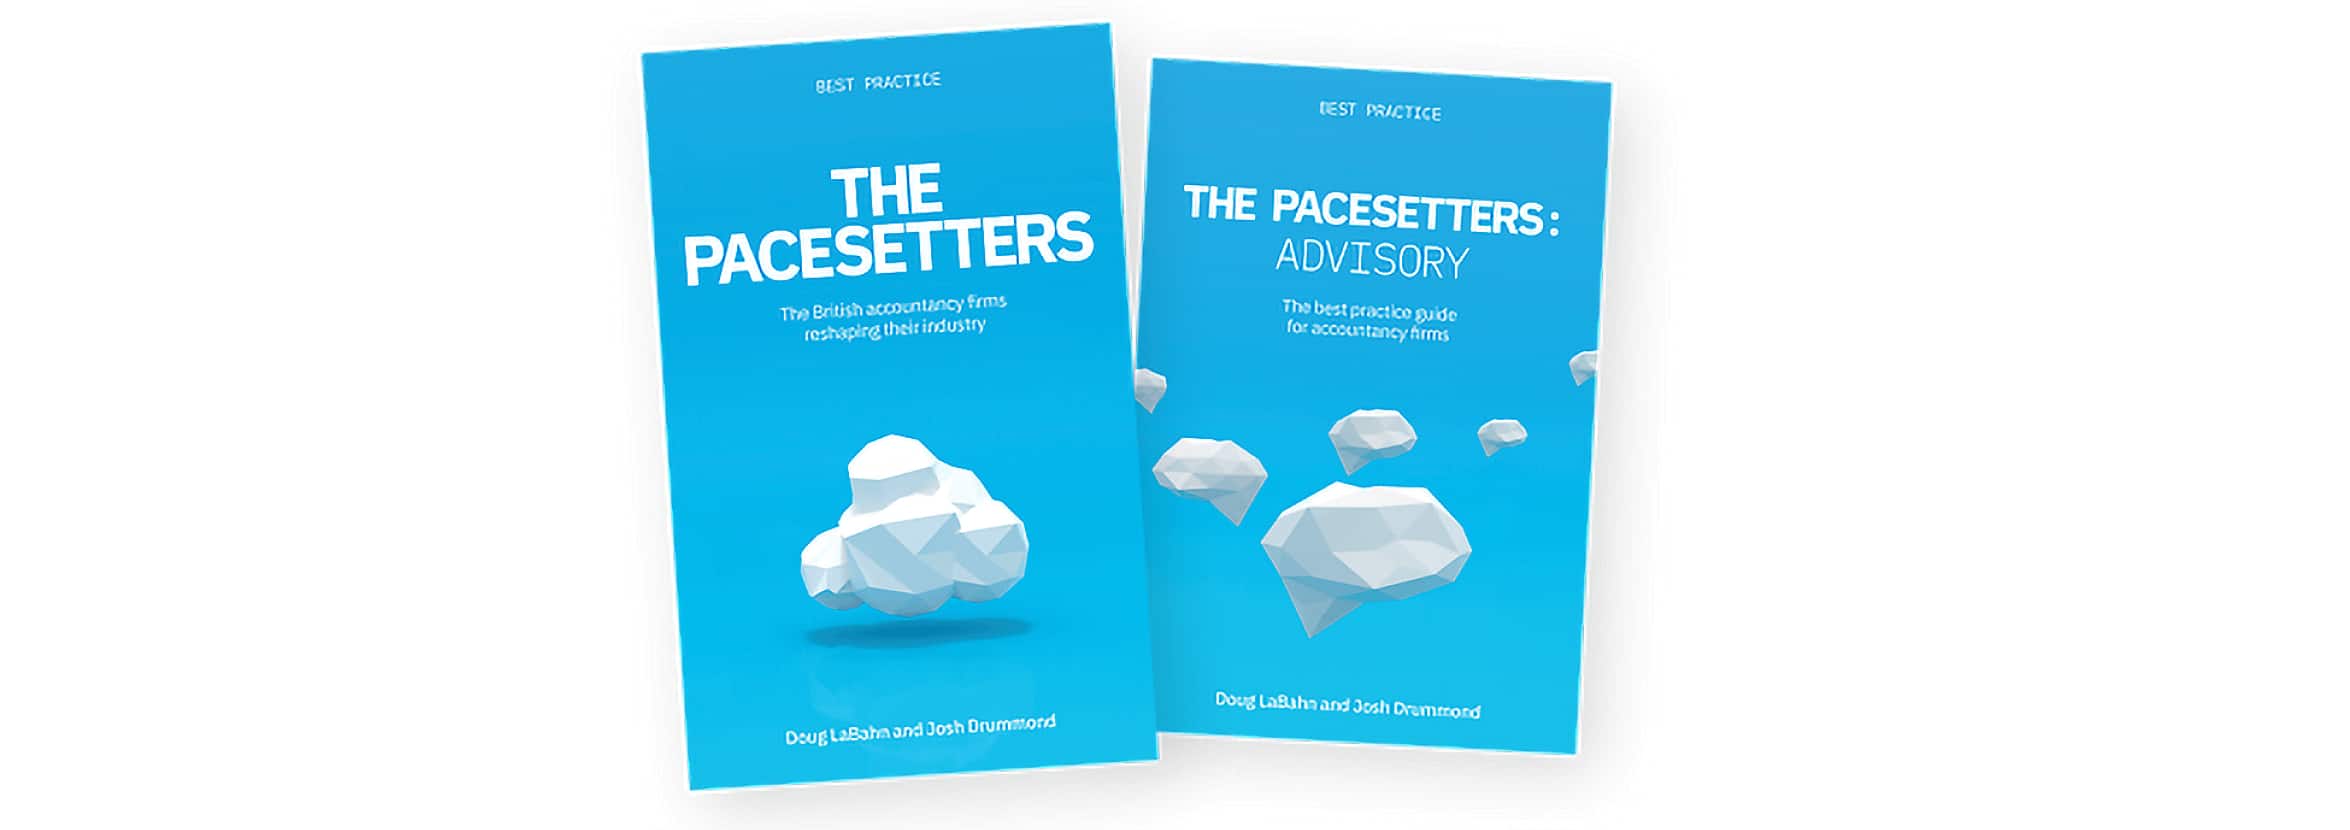 The covers of two books in The Pacesetters series about transforming business practices to cloud accounting.